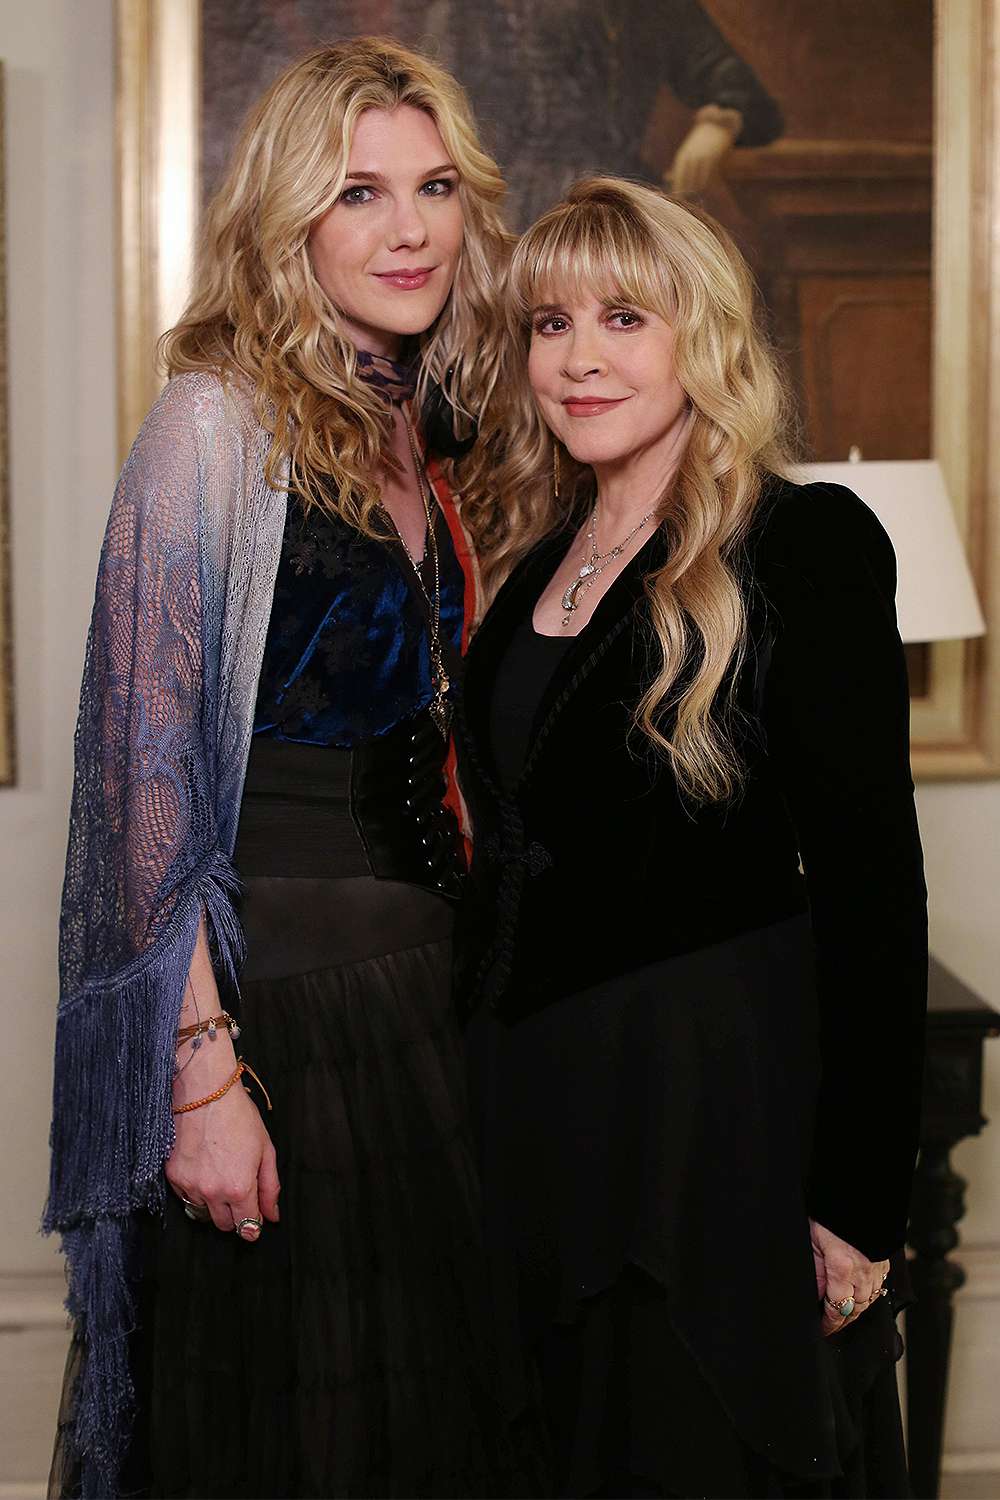 AMERICAN HORROR STORY: COVEN, l-r: Lily Rabe, Stevie Nicks in 'The Magical Delights of Stevie Nicks' (Season 3, Episode 10, aired January 8, 2013)